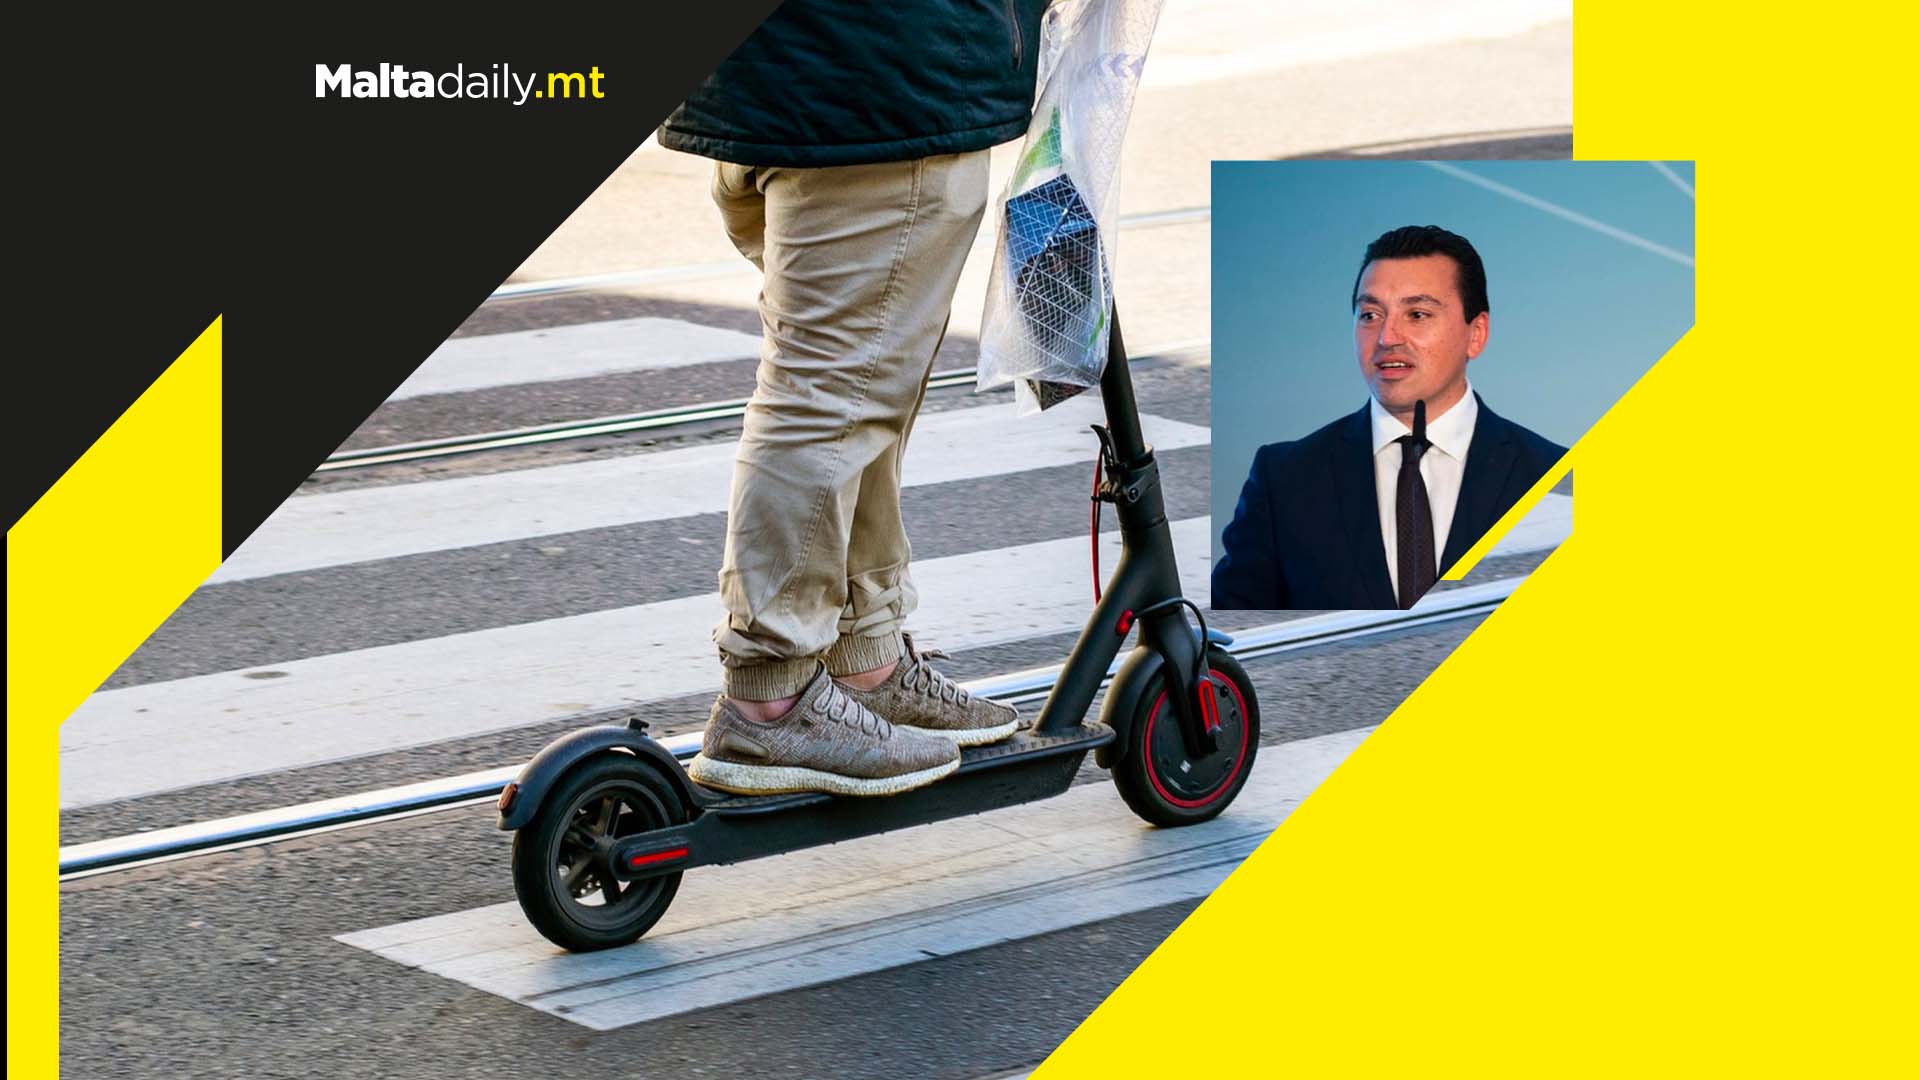 Parking bays for e-scooters to be implemented in Malta